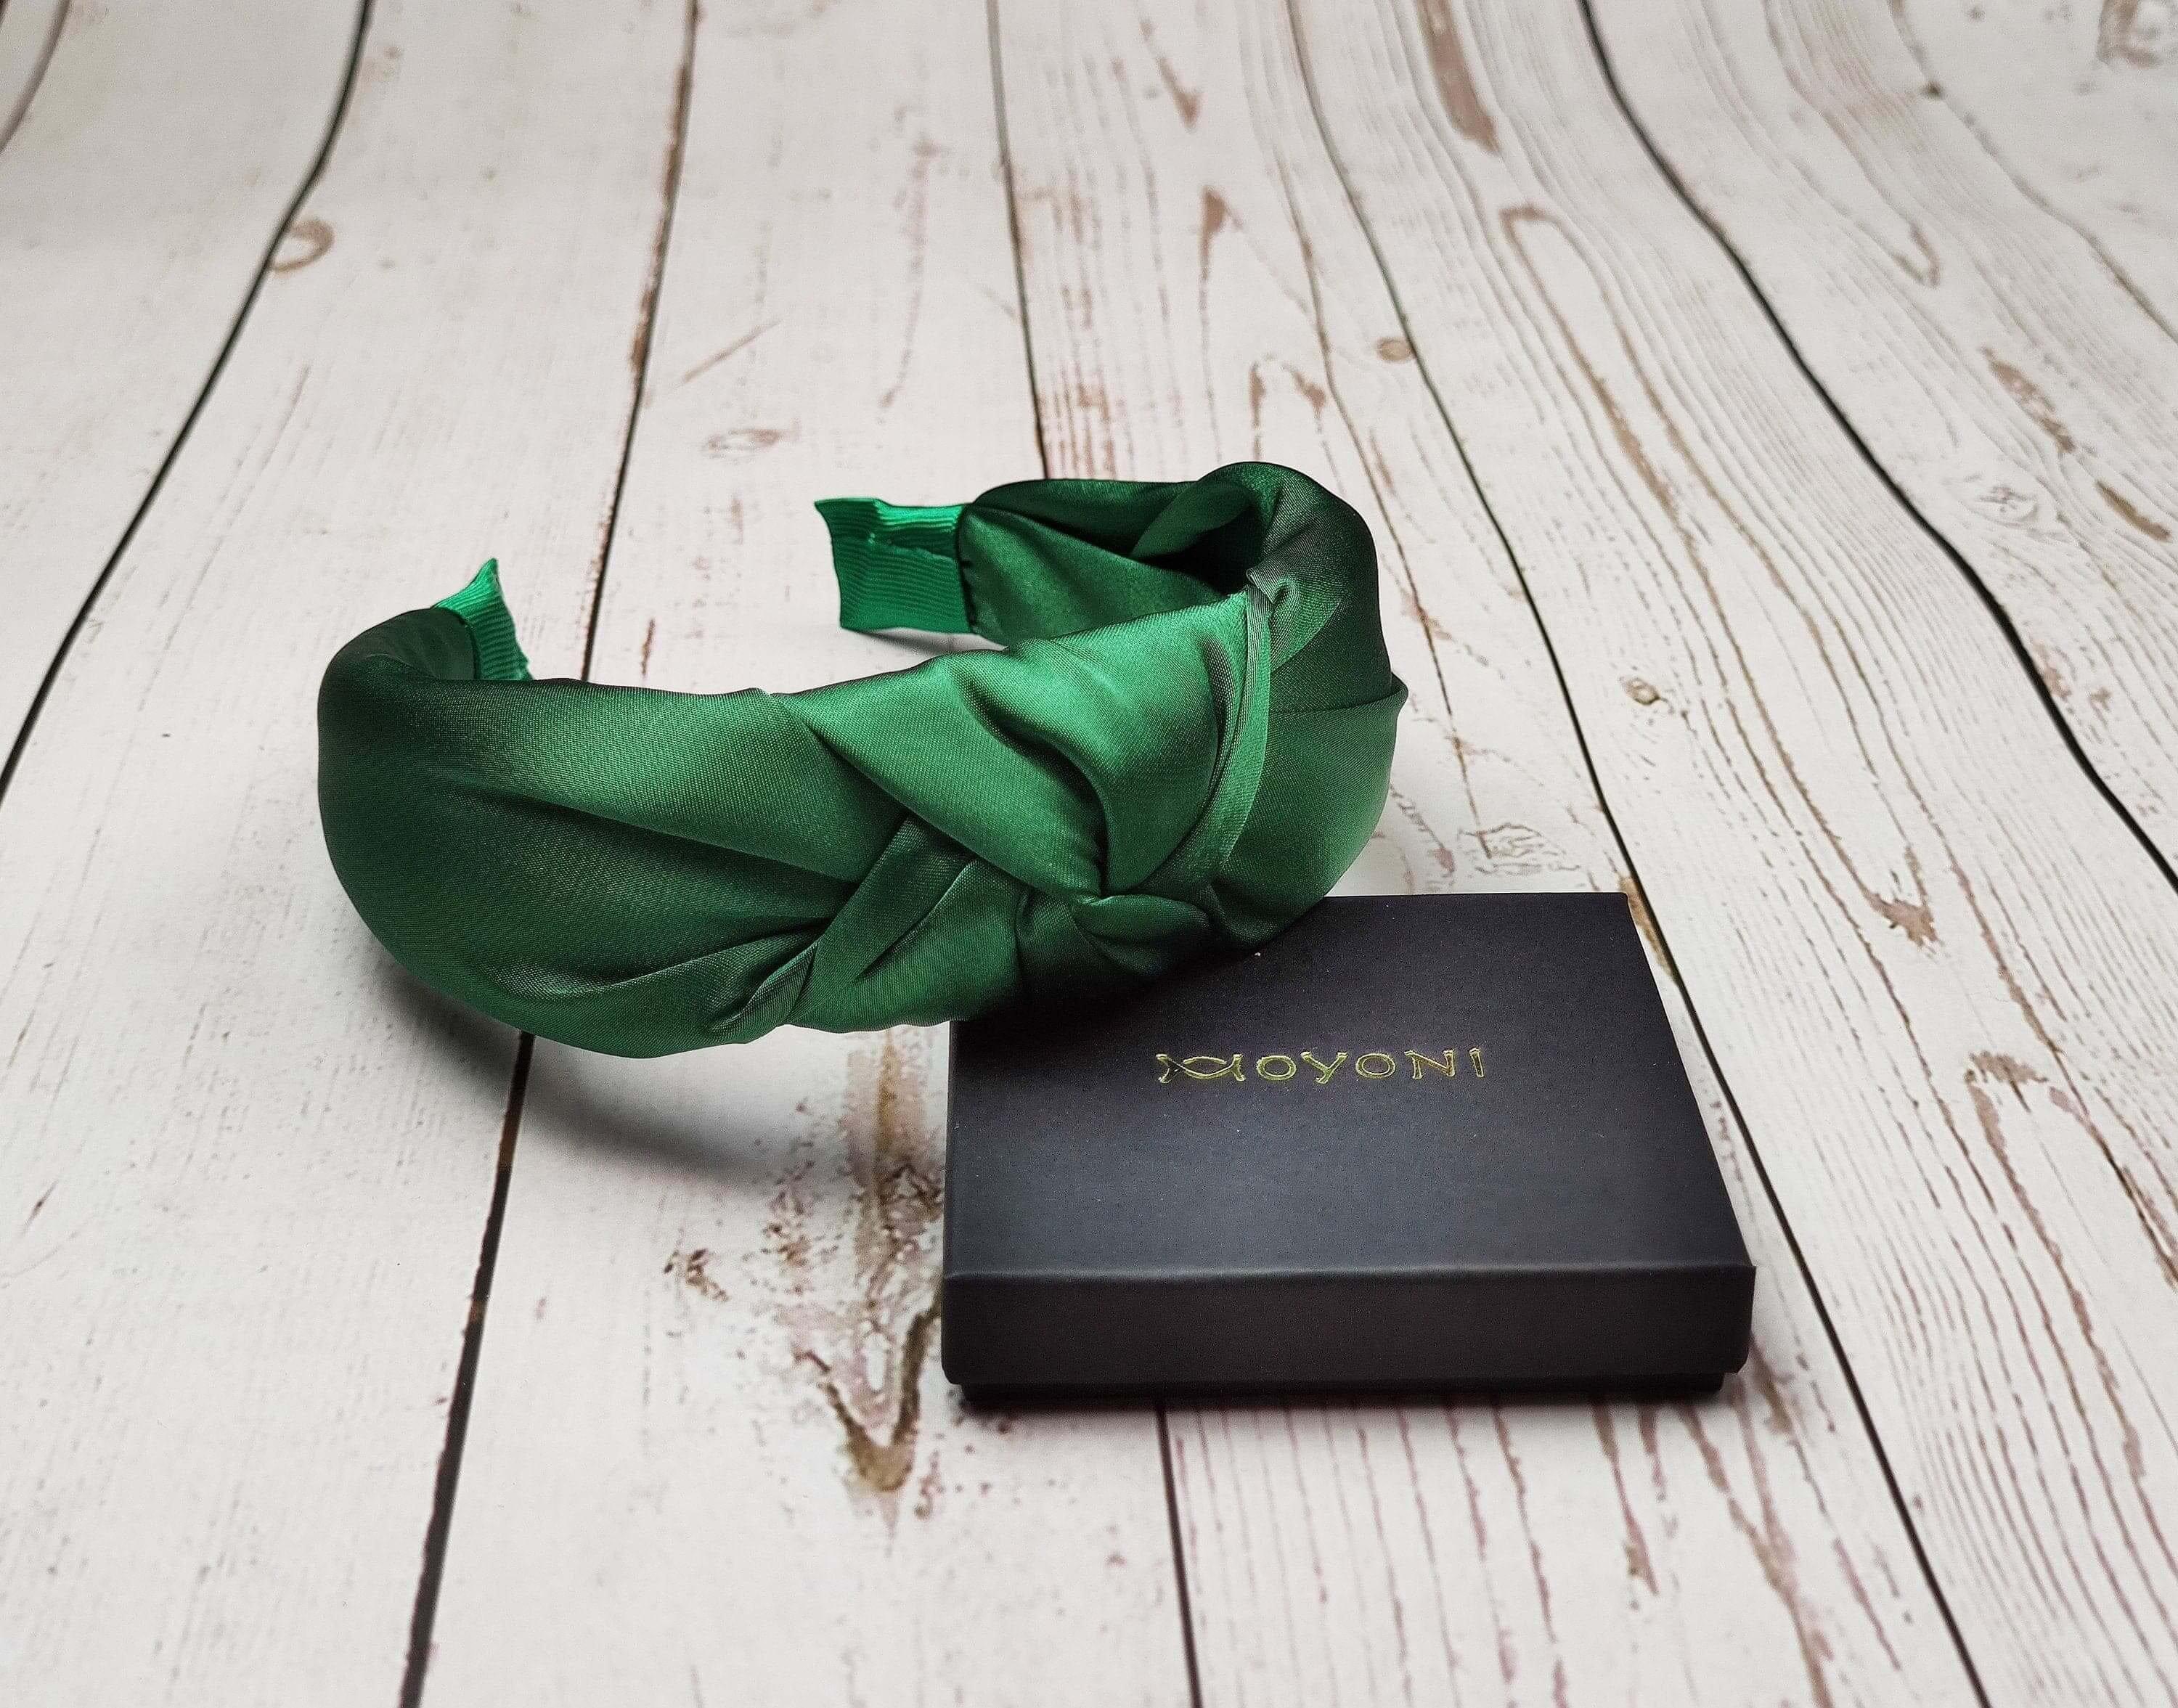 Charming Emerald Green Padded Satin Knot Headband - A Timeless and Fashionable Hair Accessory for Women available at Moyoni Design